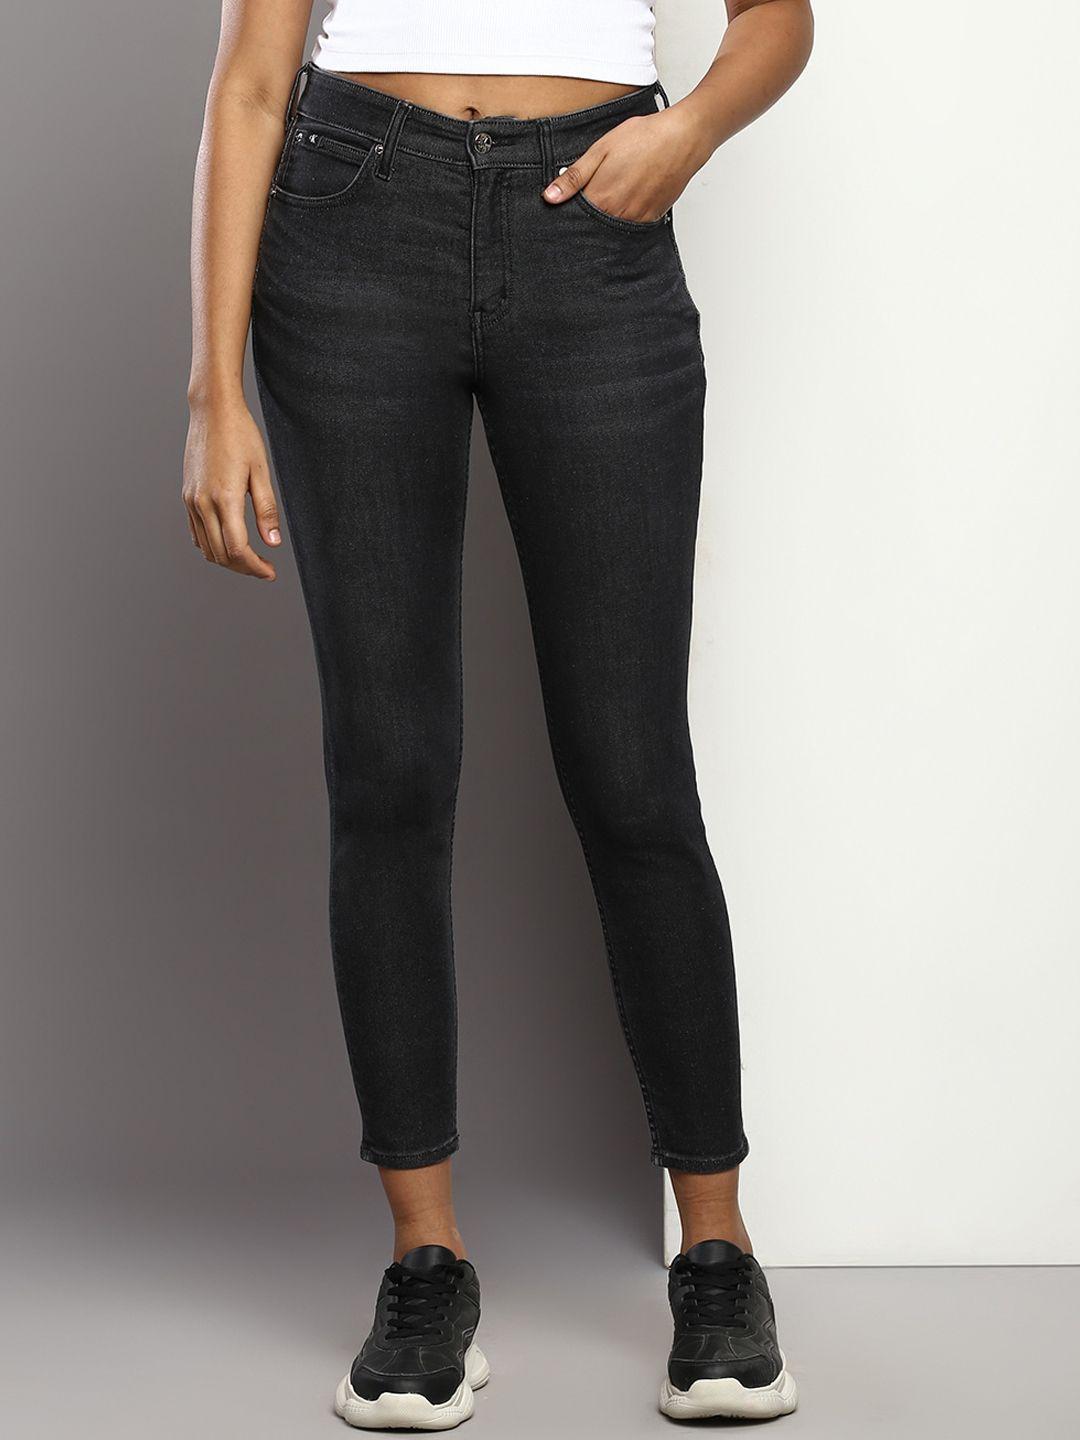 calvin klein jeans women skinny fit high-rise jeans